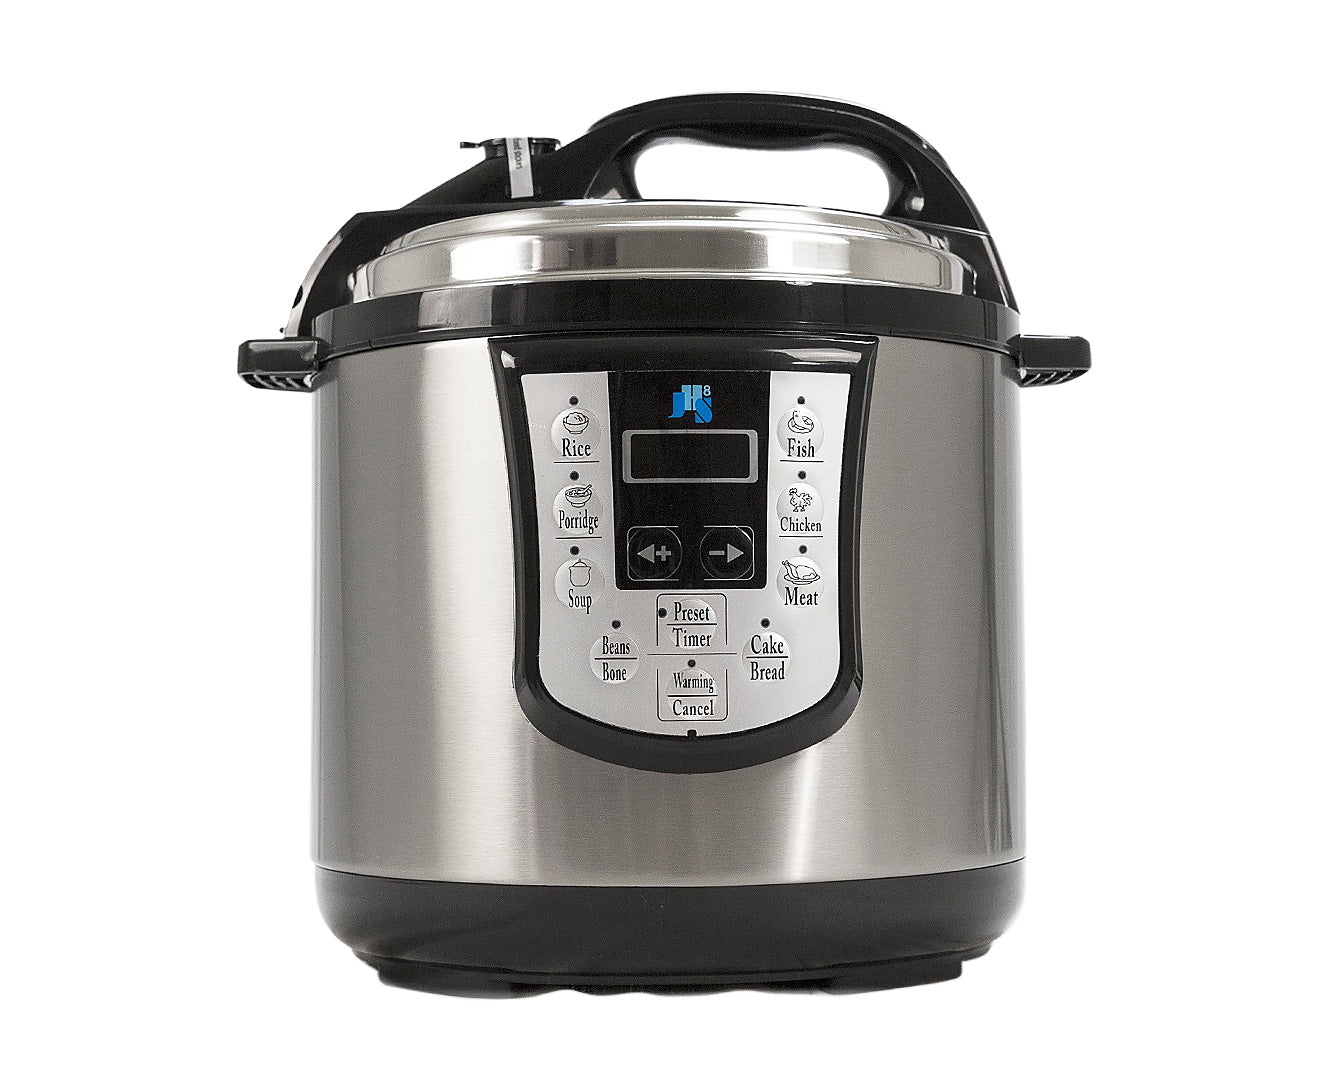 8 in 1 Multi-function Electric Pressure Cooker - 6L